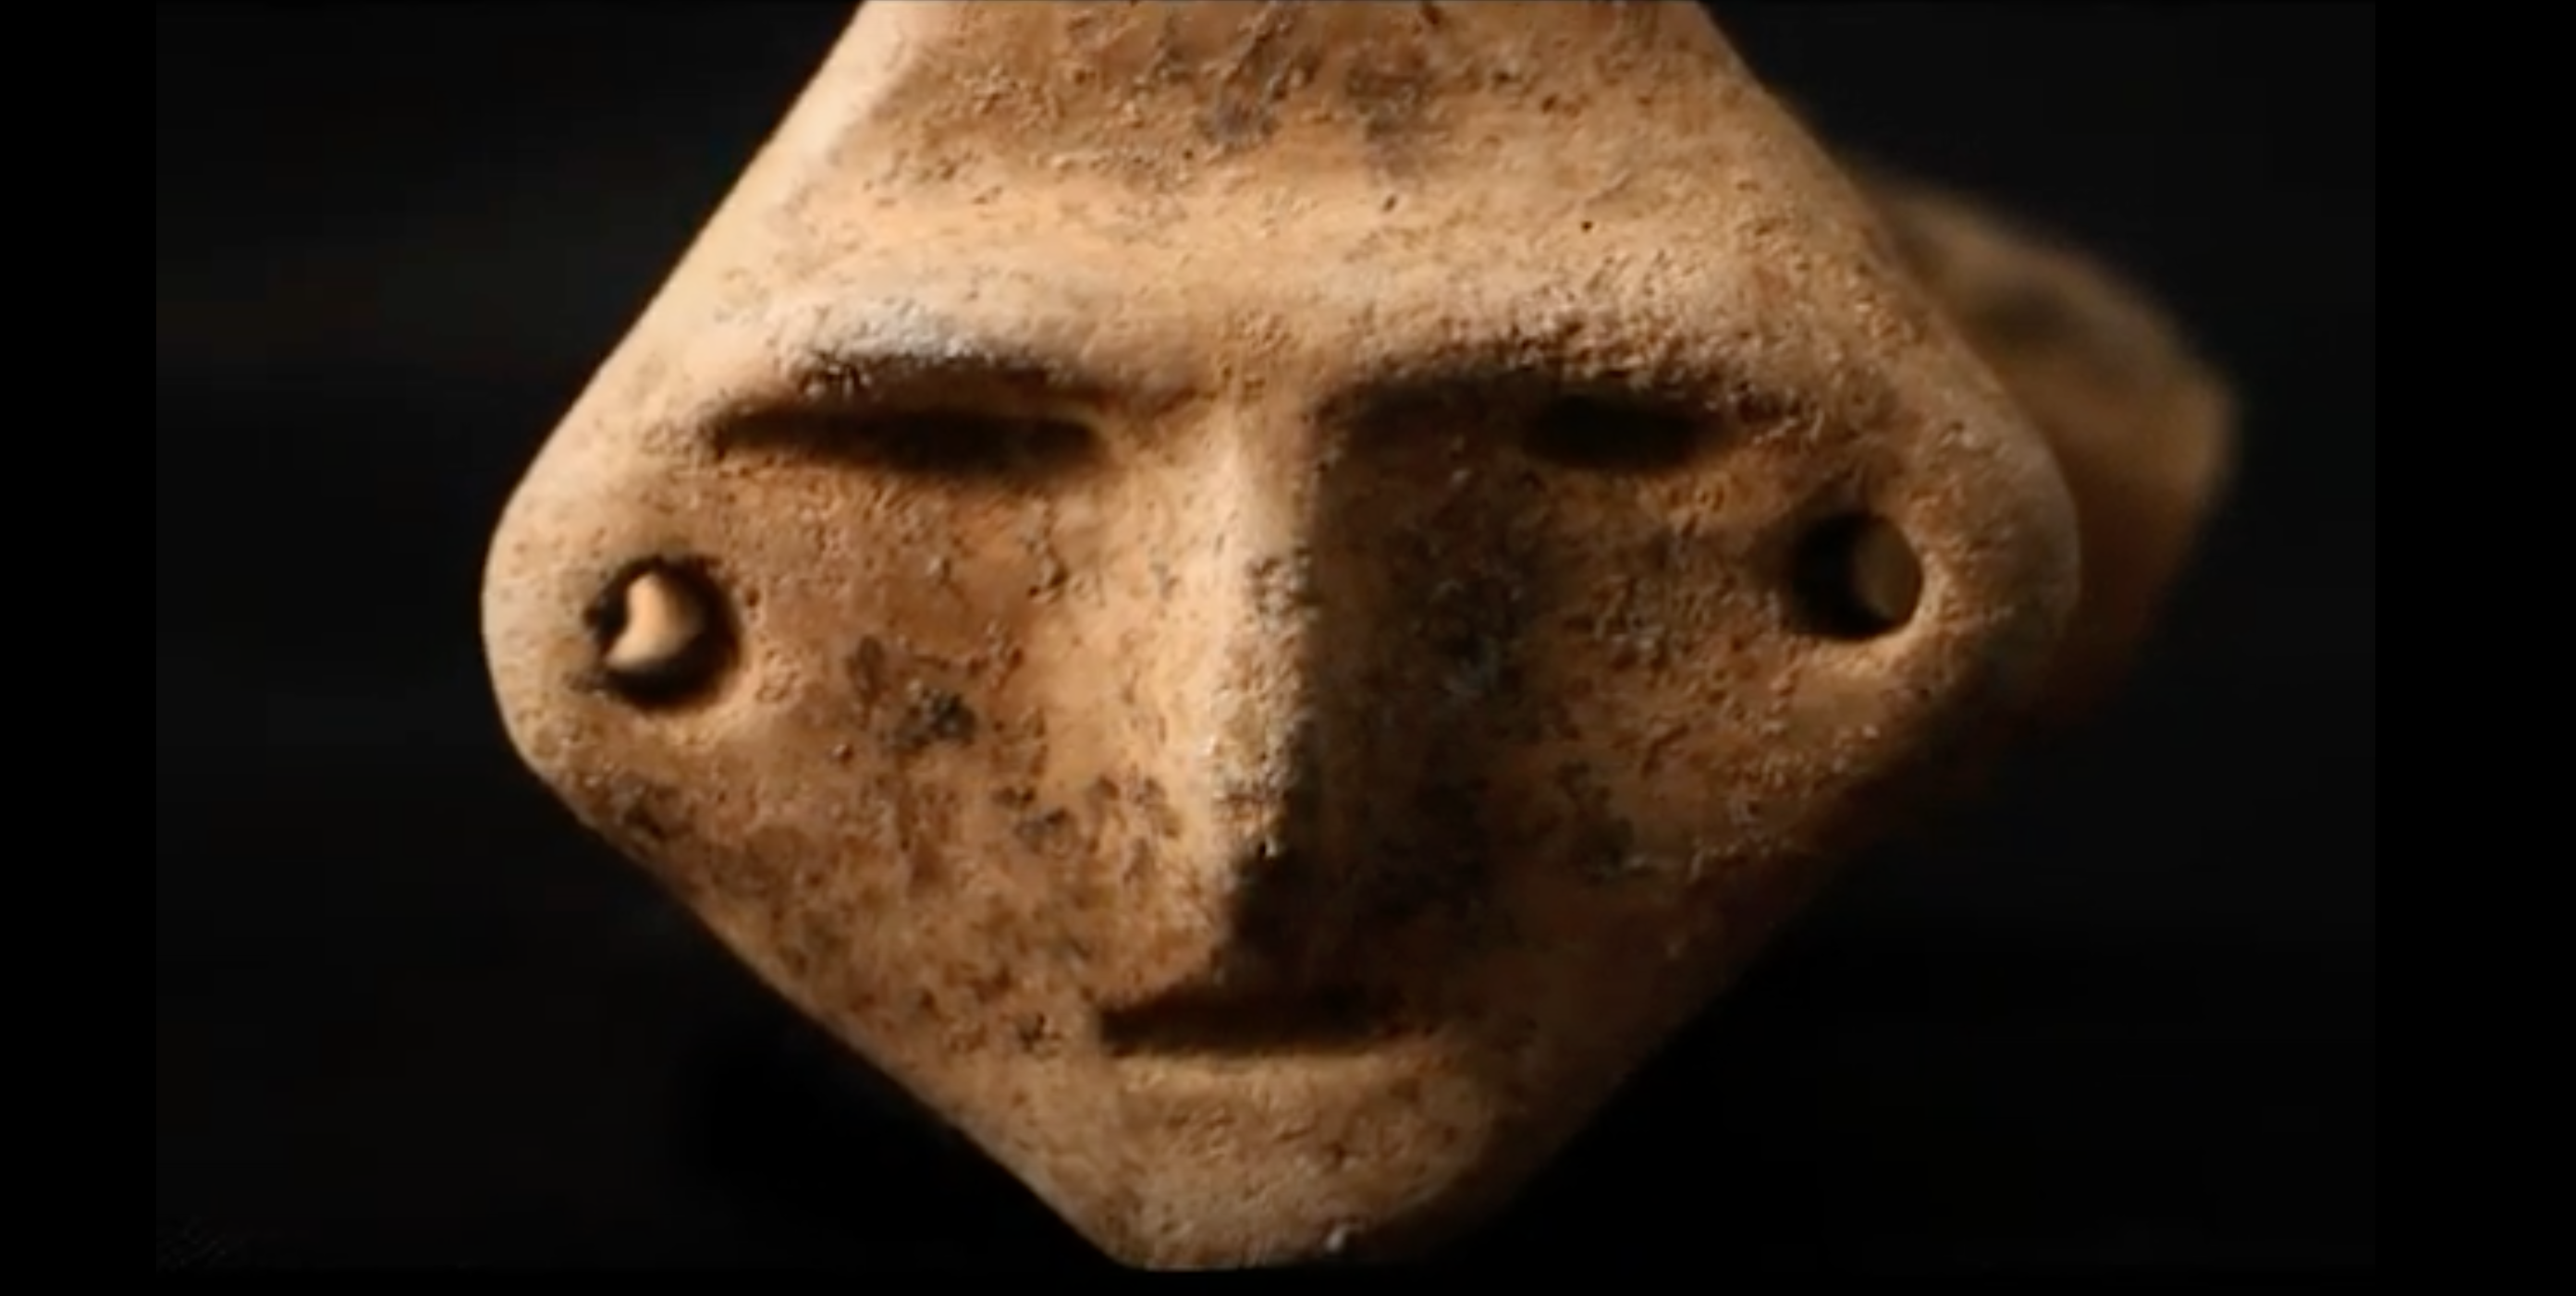 A ceramic fragment with the image of a face was found on Main Steet. (Screenshot from The Charlotte Amalie Saladoid Excavation Documentary)